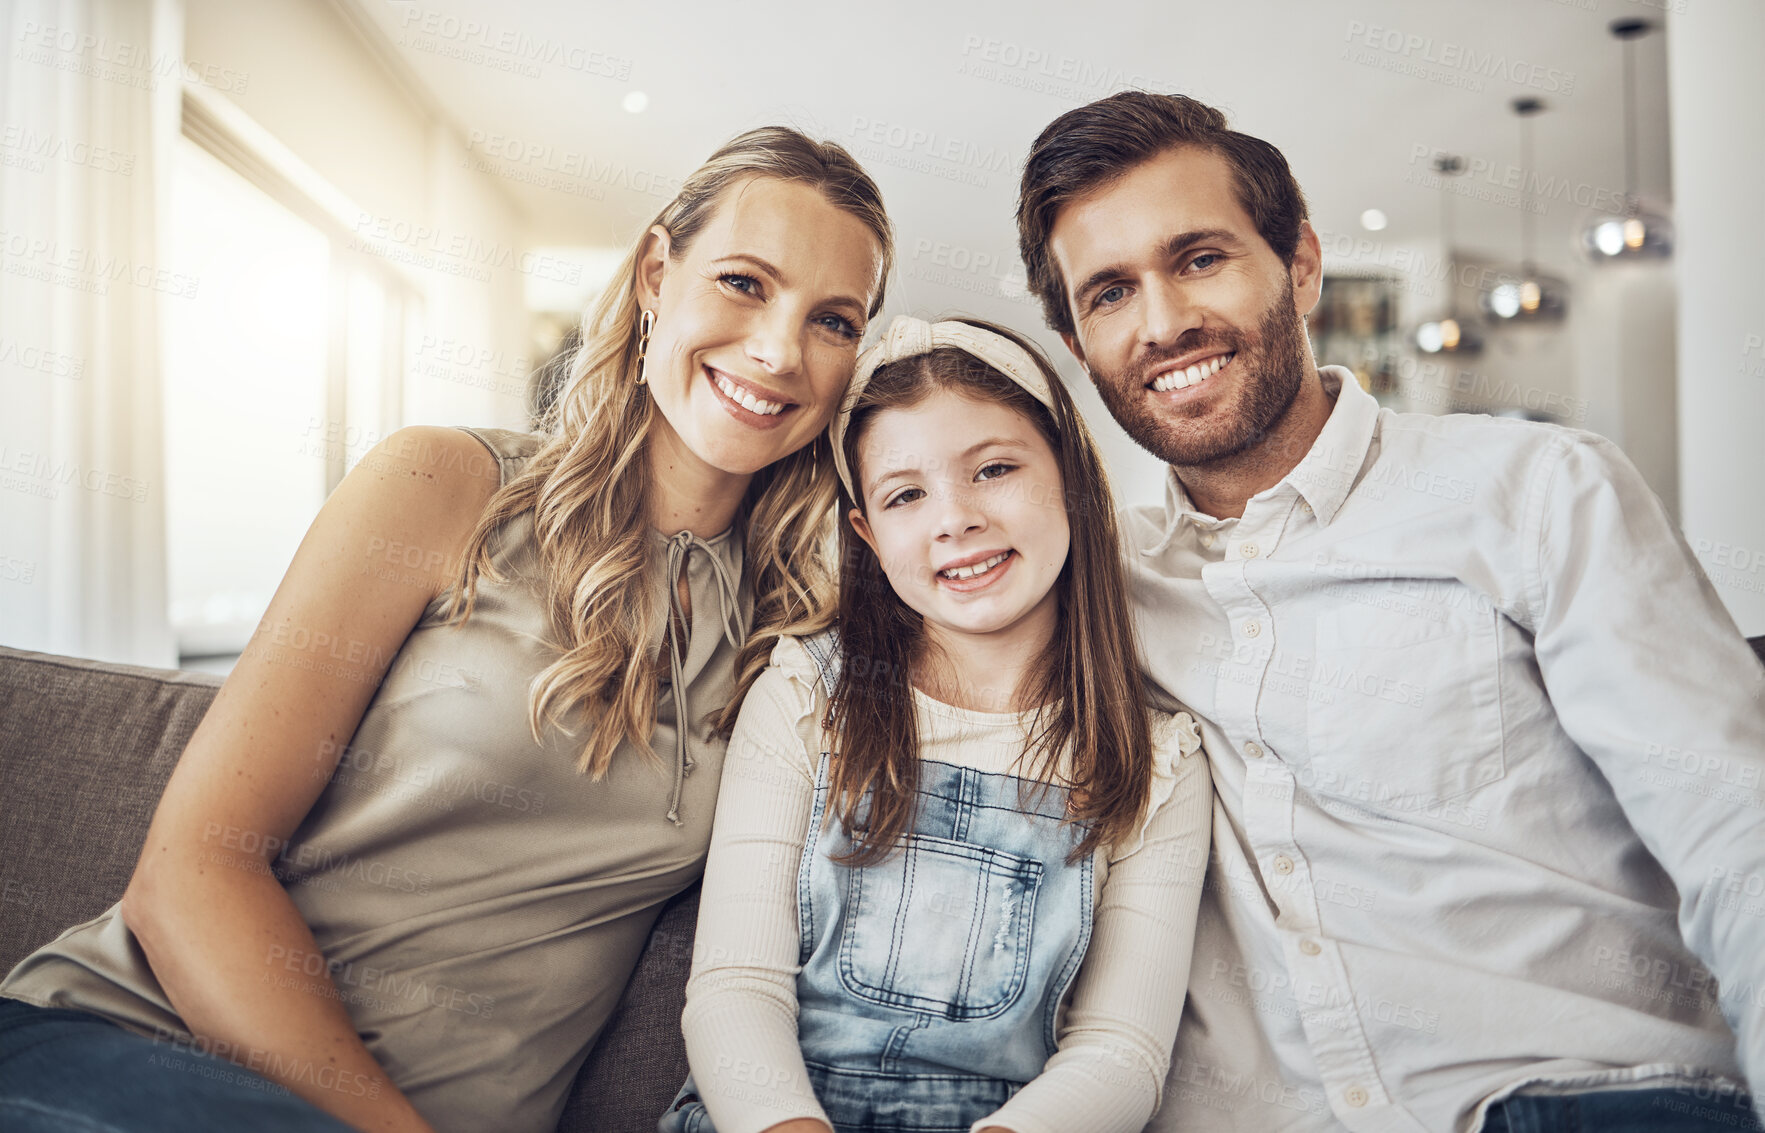 Buy stock photo Portrait, mother or father with a girl as a happy family in living room bonding in Australia with love or care. Child, smile or parents relaxing with a smile enjoying quality time on a fun holiday 